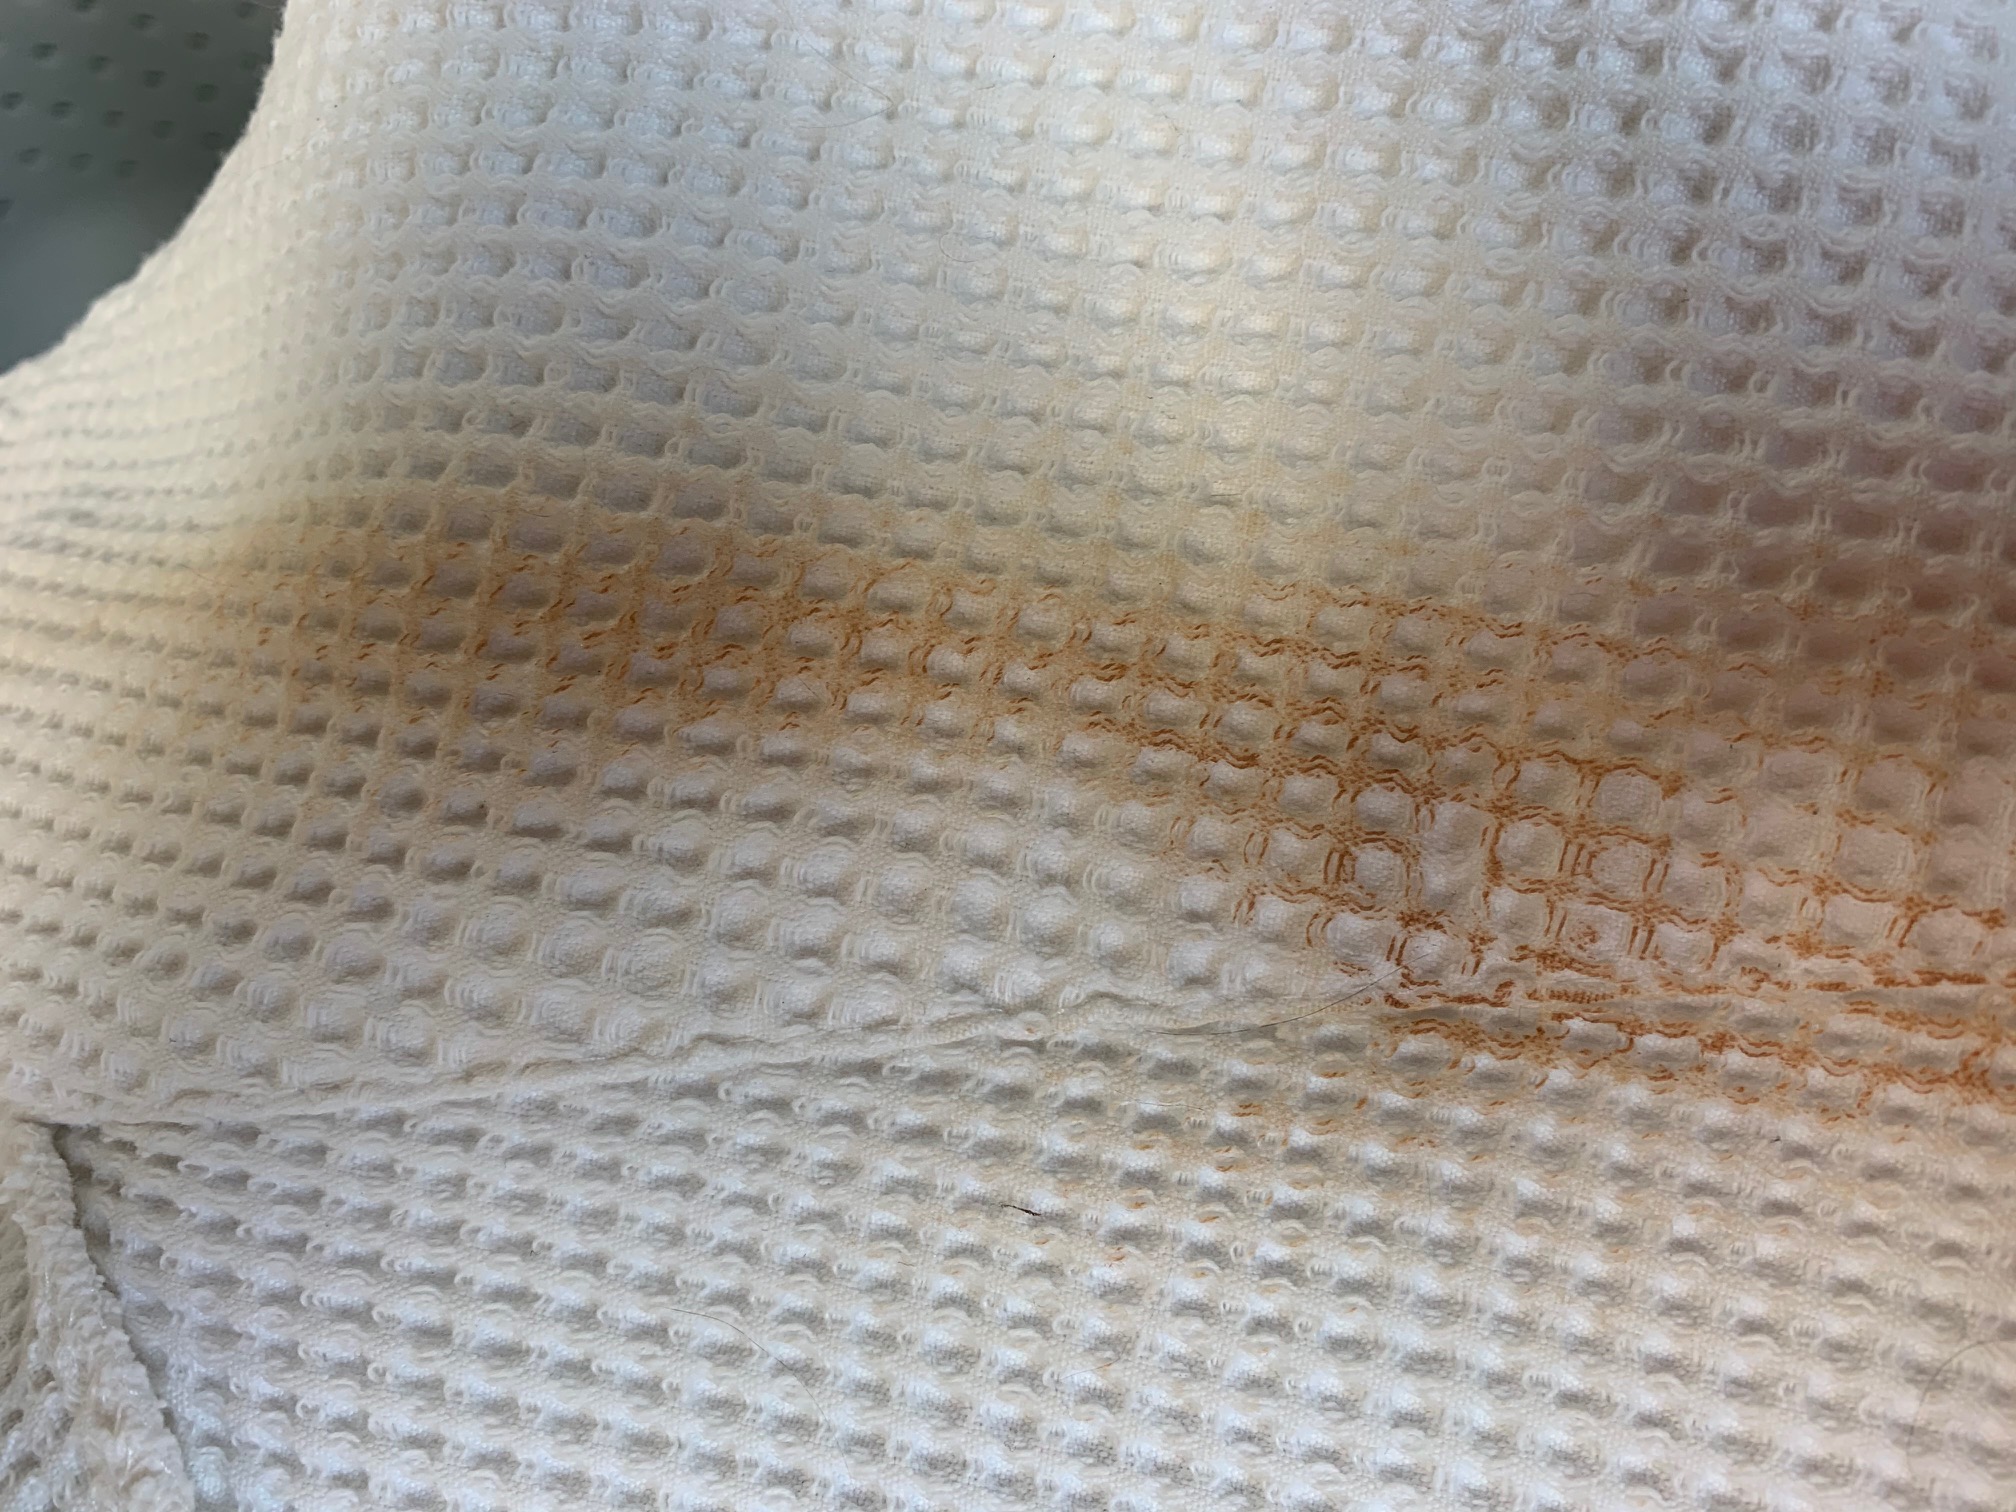 Close up of white robe with big brown makeup stain